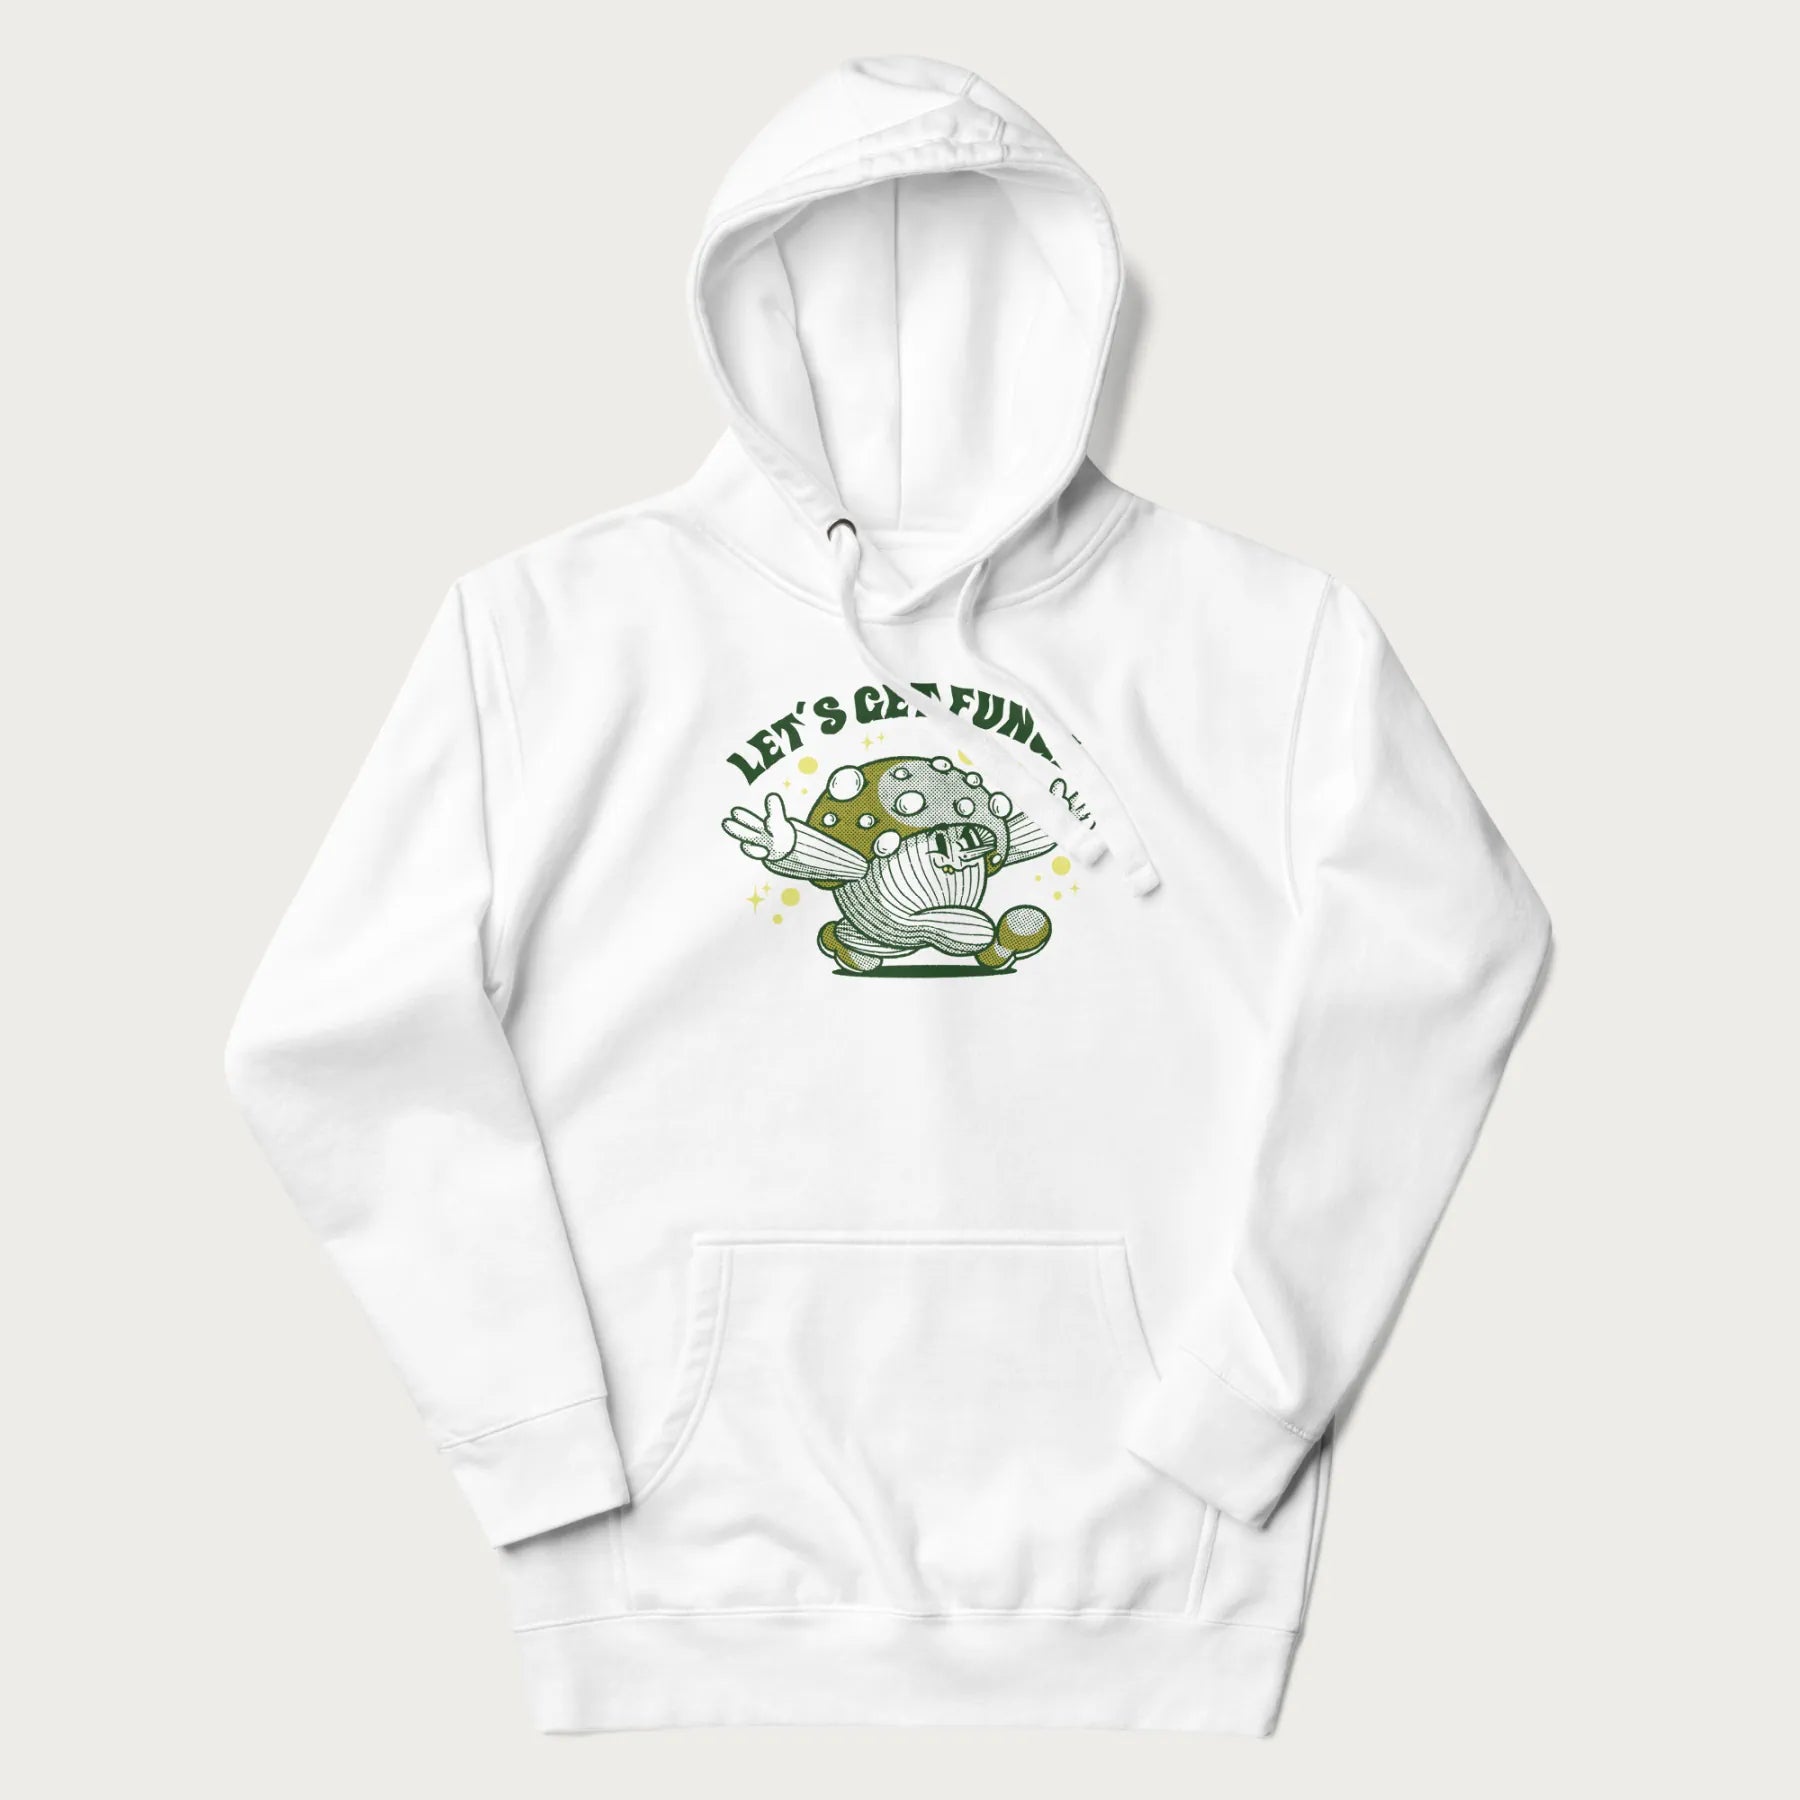 White hoodie with a retro-inspired graphic of a mushroom mascot character and the text 'Let's Get Fungi'.